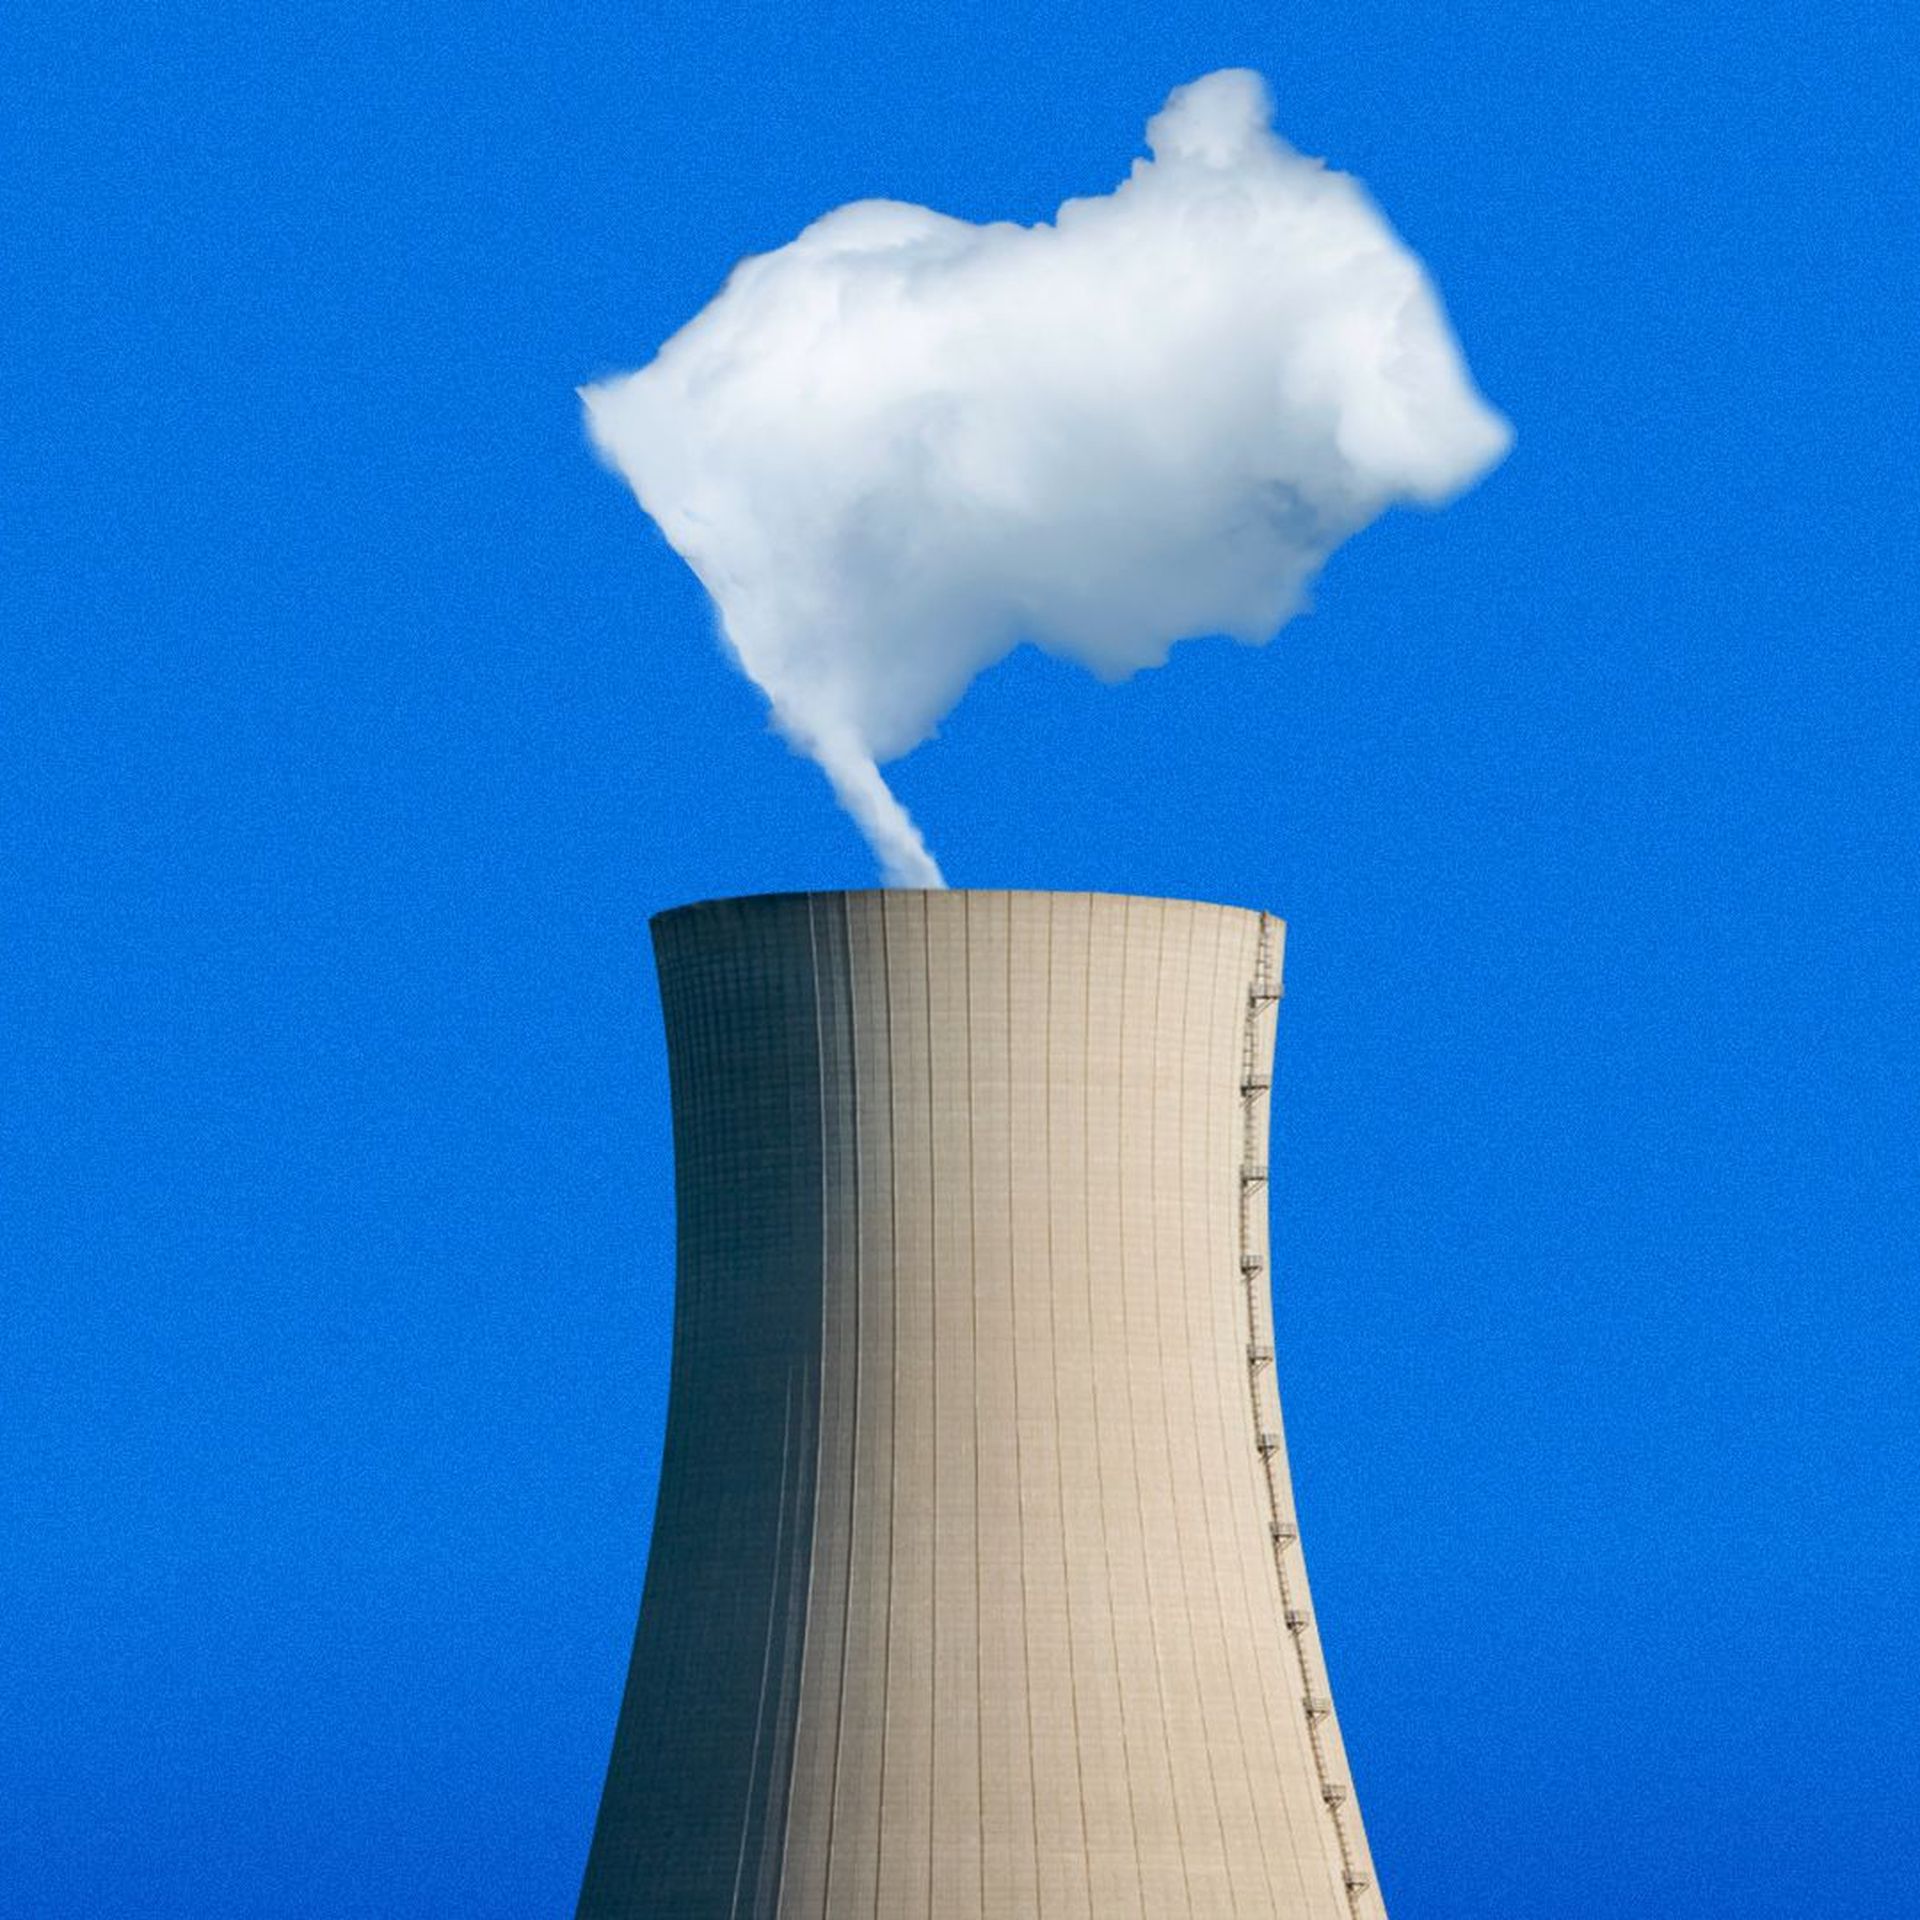 Illustration of a nuclear power plant tower with steam in the shape of a white flag